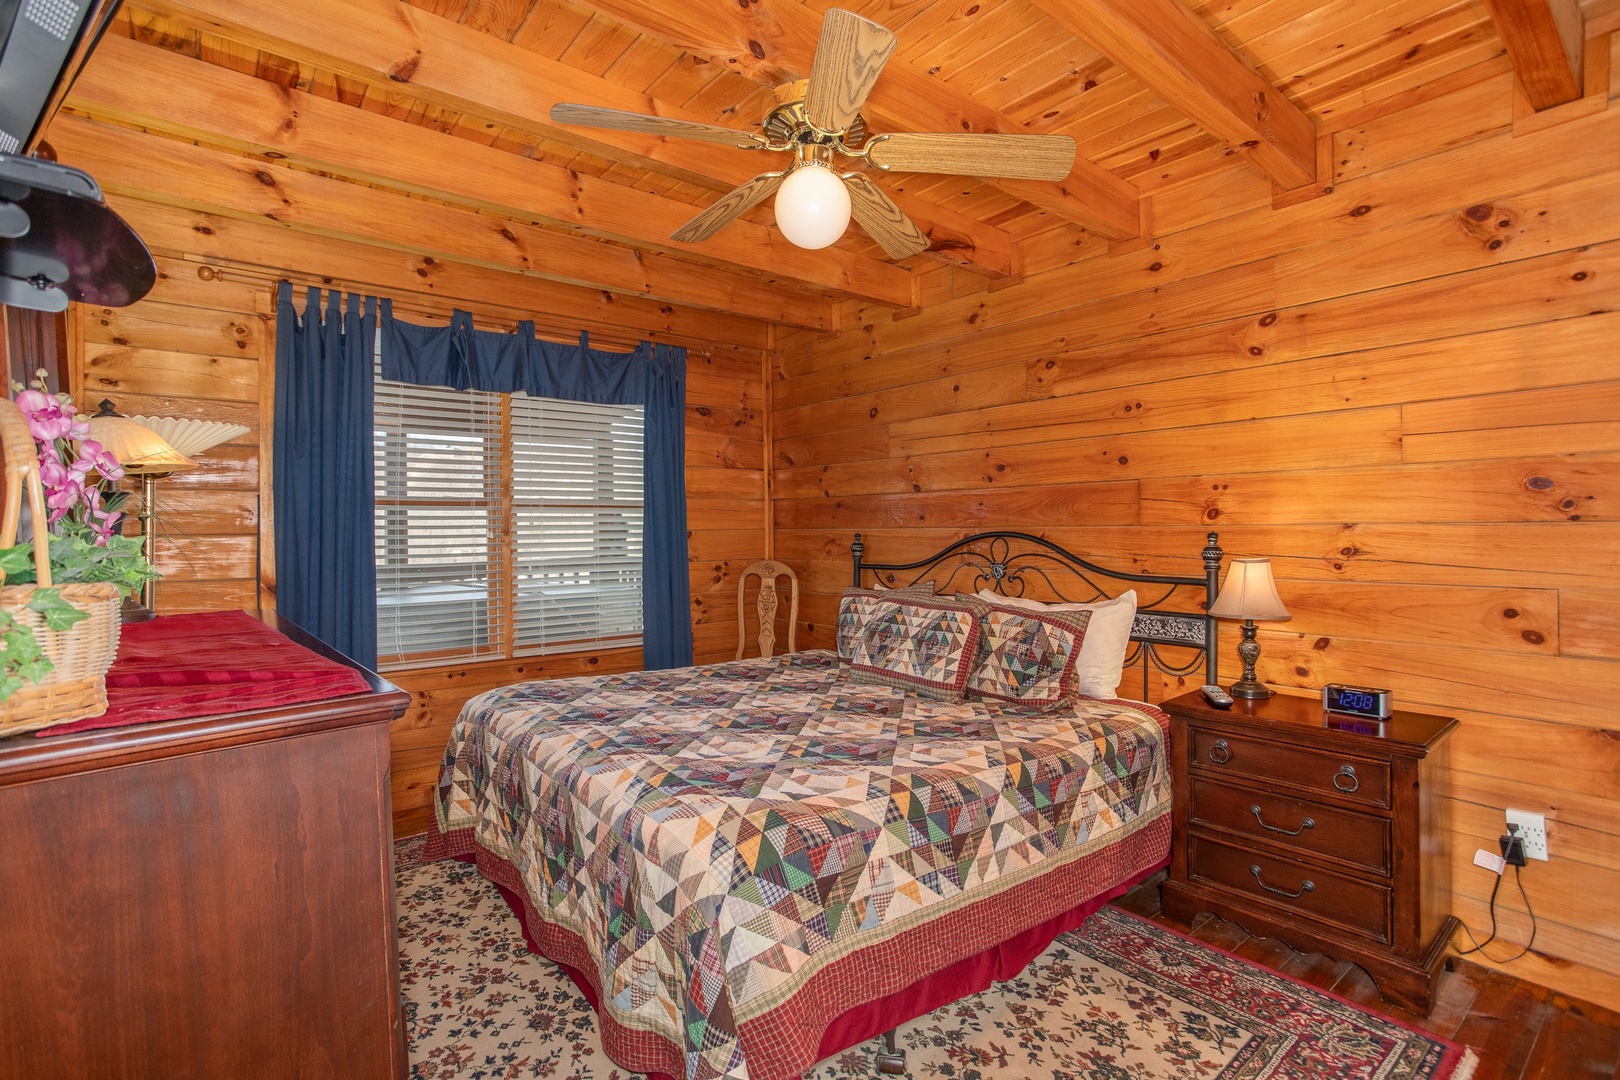 Bedroom with a king bed at Shiloh, a 3 bedroom cabin rental located in Gatlinburg